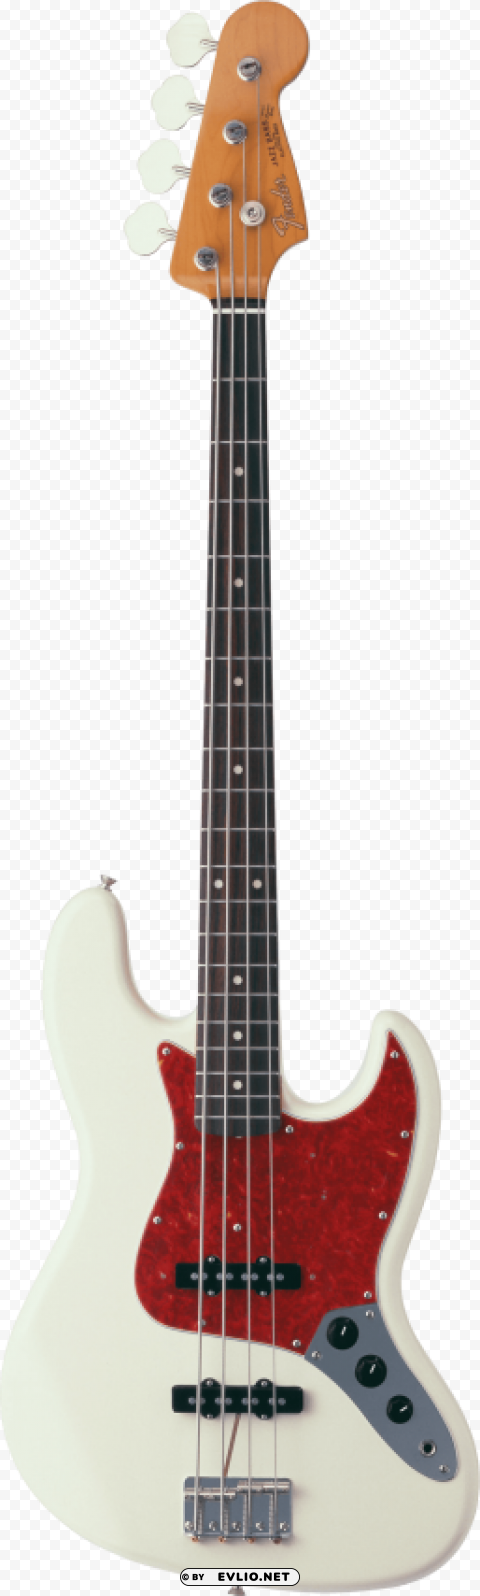 electric guitar Isolated Graphic with Transparent Background PNG